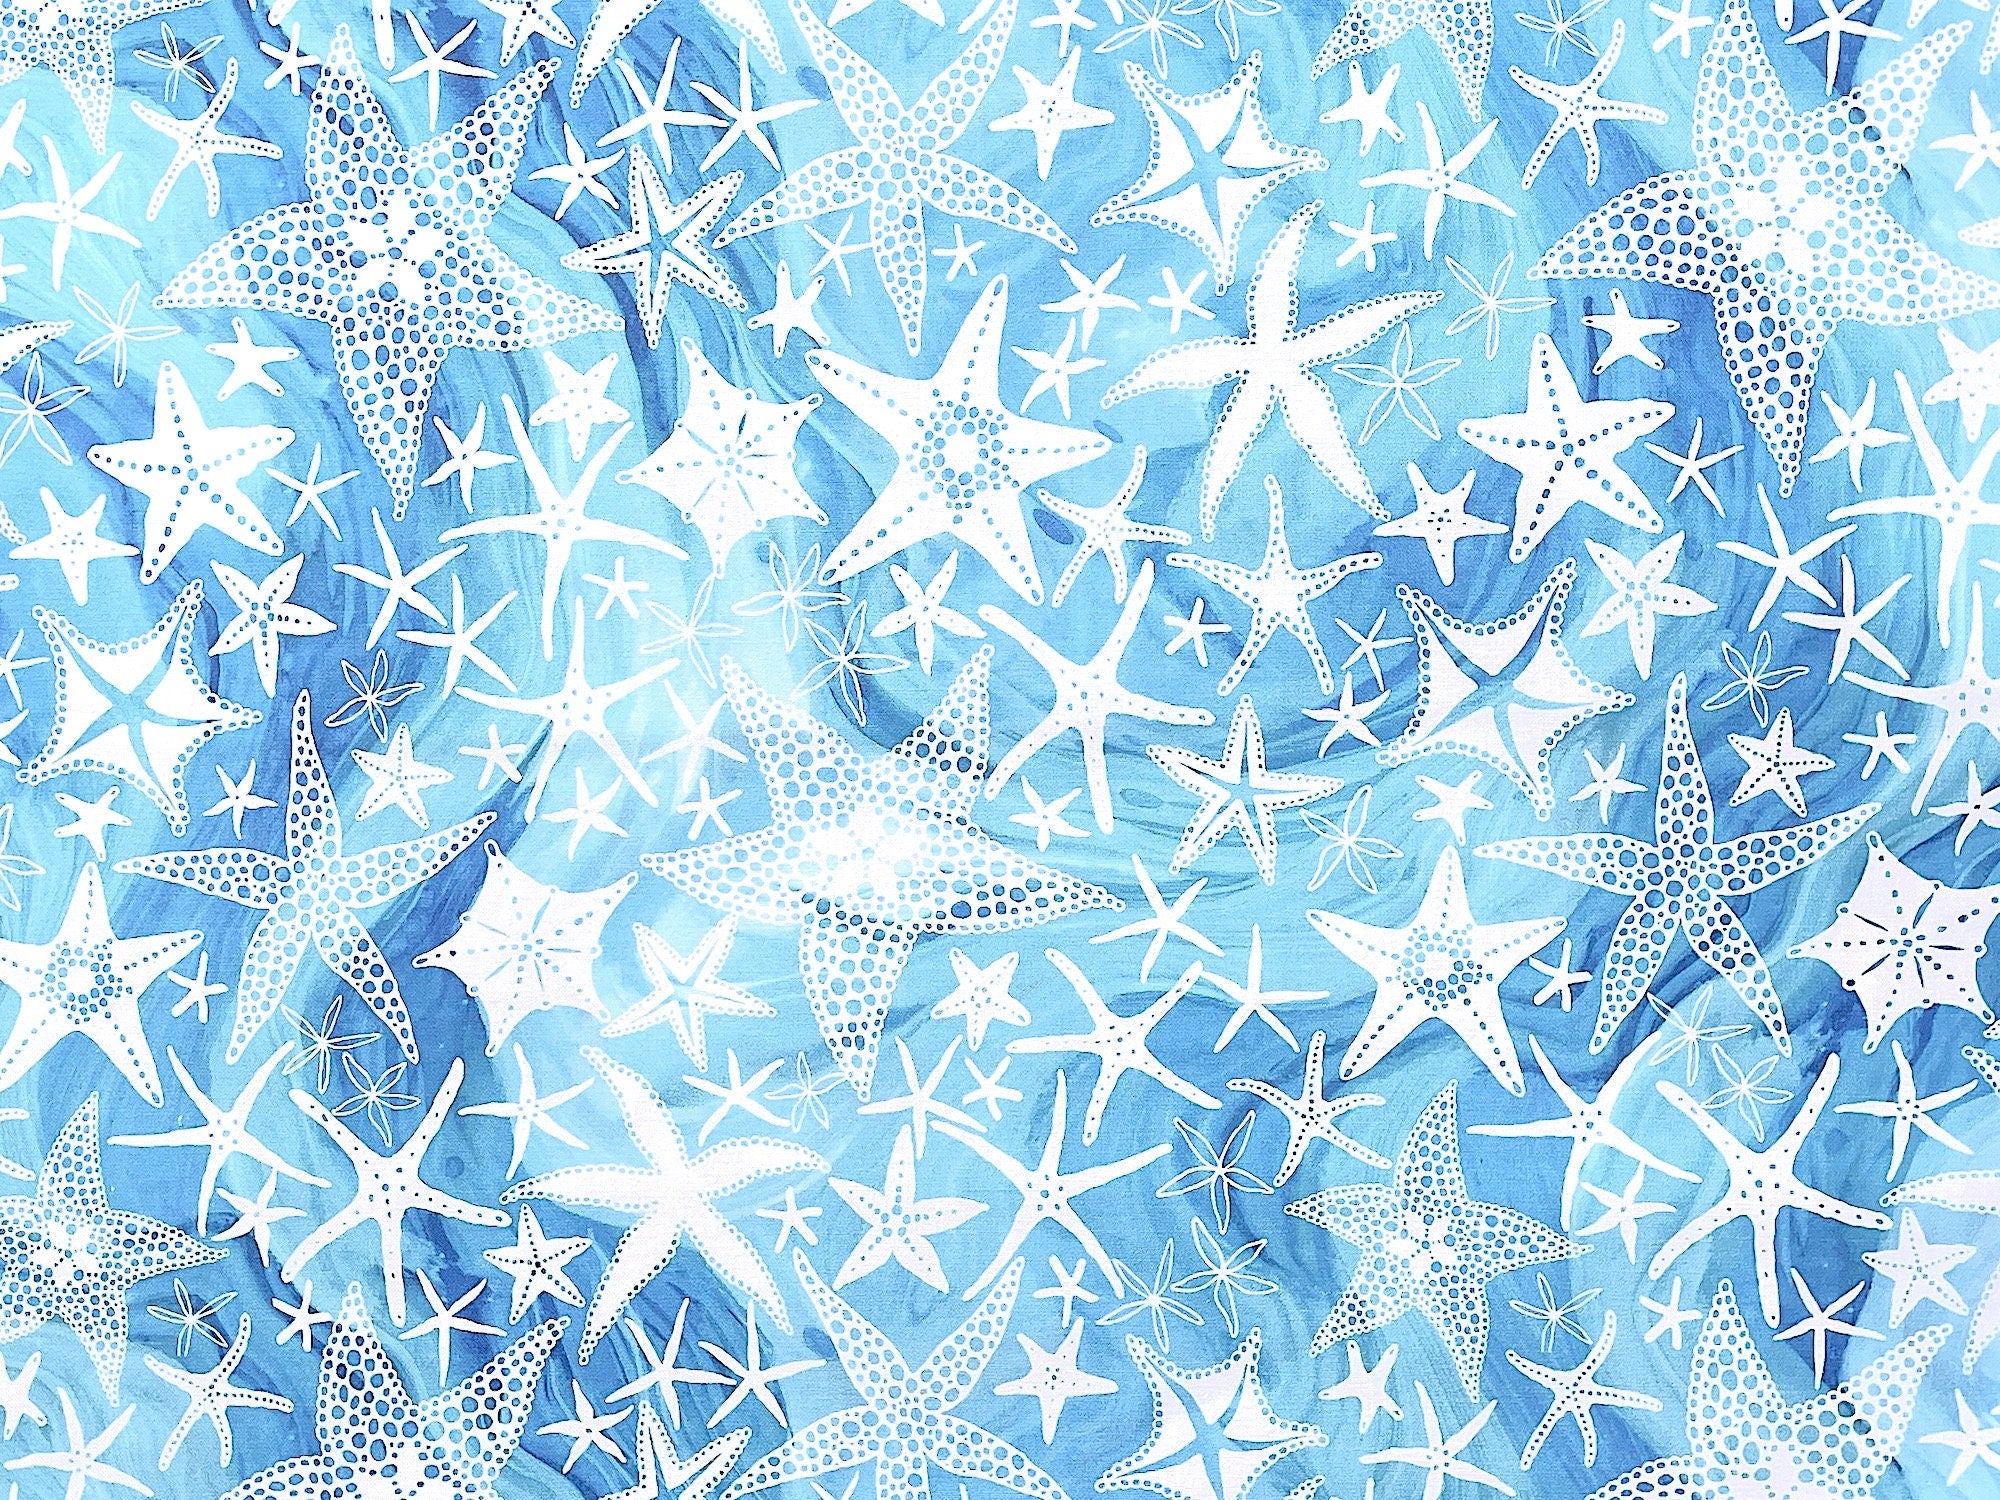 Blue fabric covered with various sizes and shaped starfish.